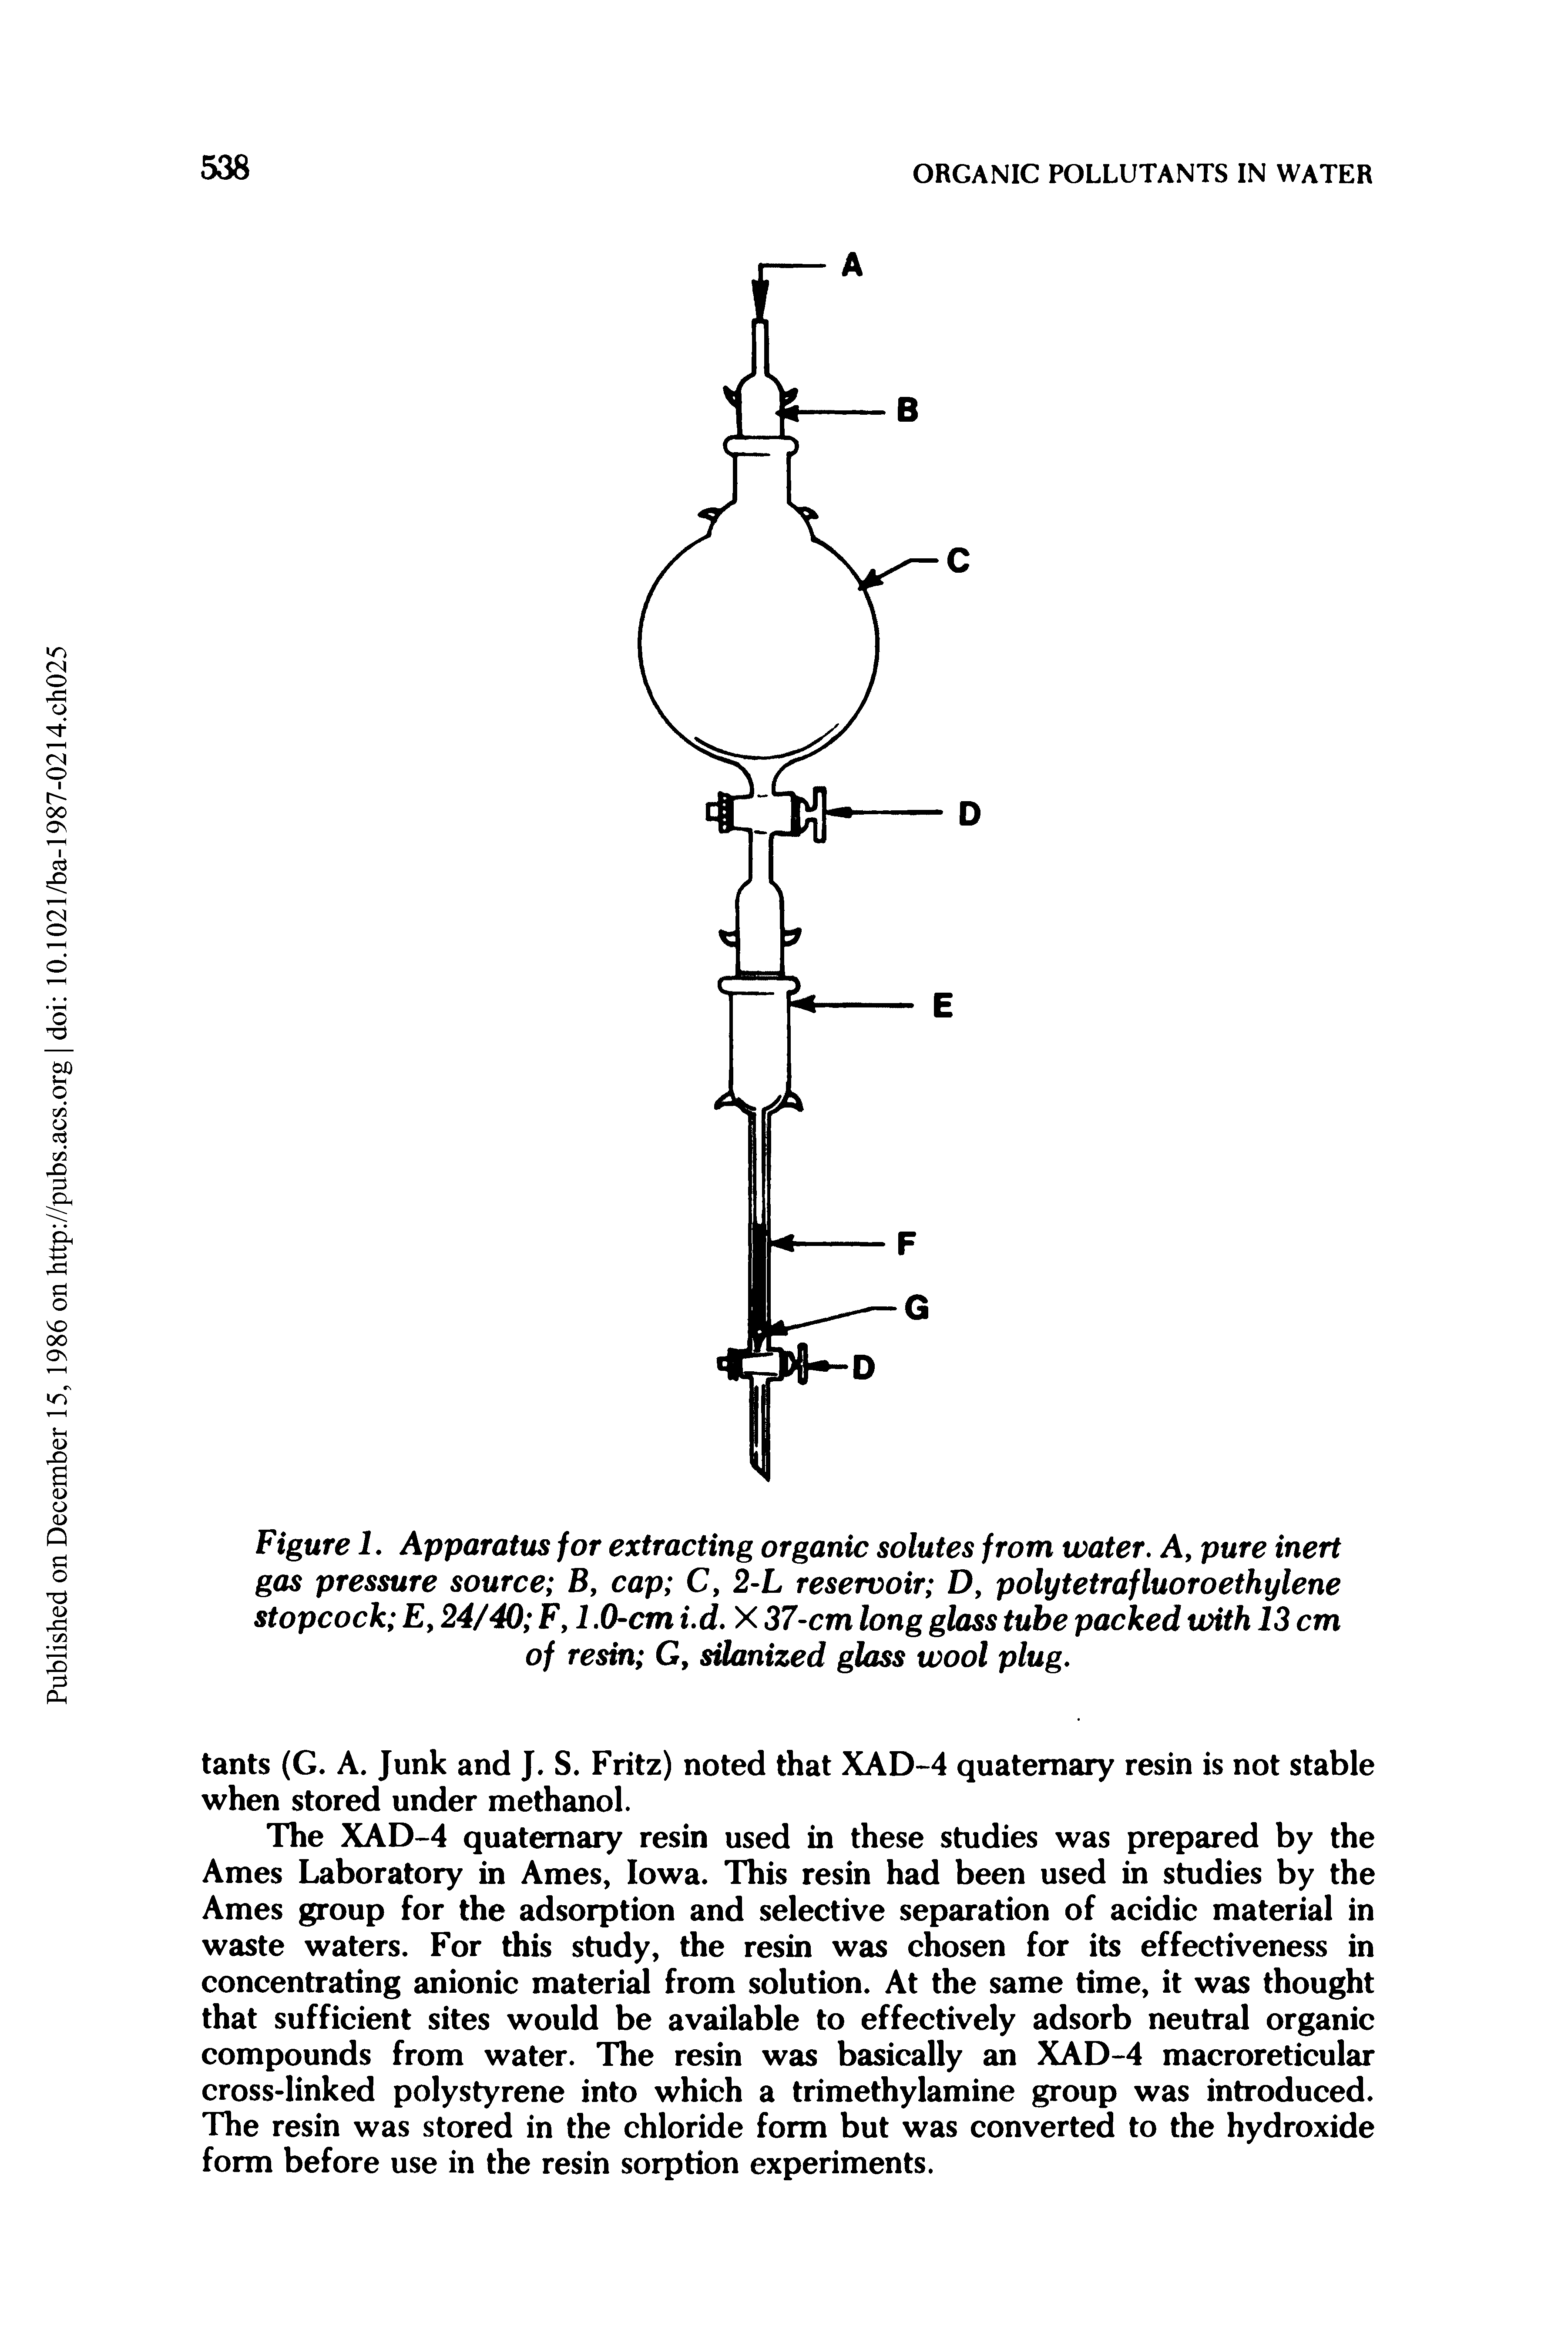 Figure L Apparatus for extracting organic solutes from water. A, pure inert gas pressure source B, cap C, 2-L reservoir D, polytetrafluoroethylene stopcock F, 24/40 F, 1.0-cm i.d. X 37-cm long glass tube packed with 13 cm of resin G, silanized glass wool plug.